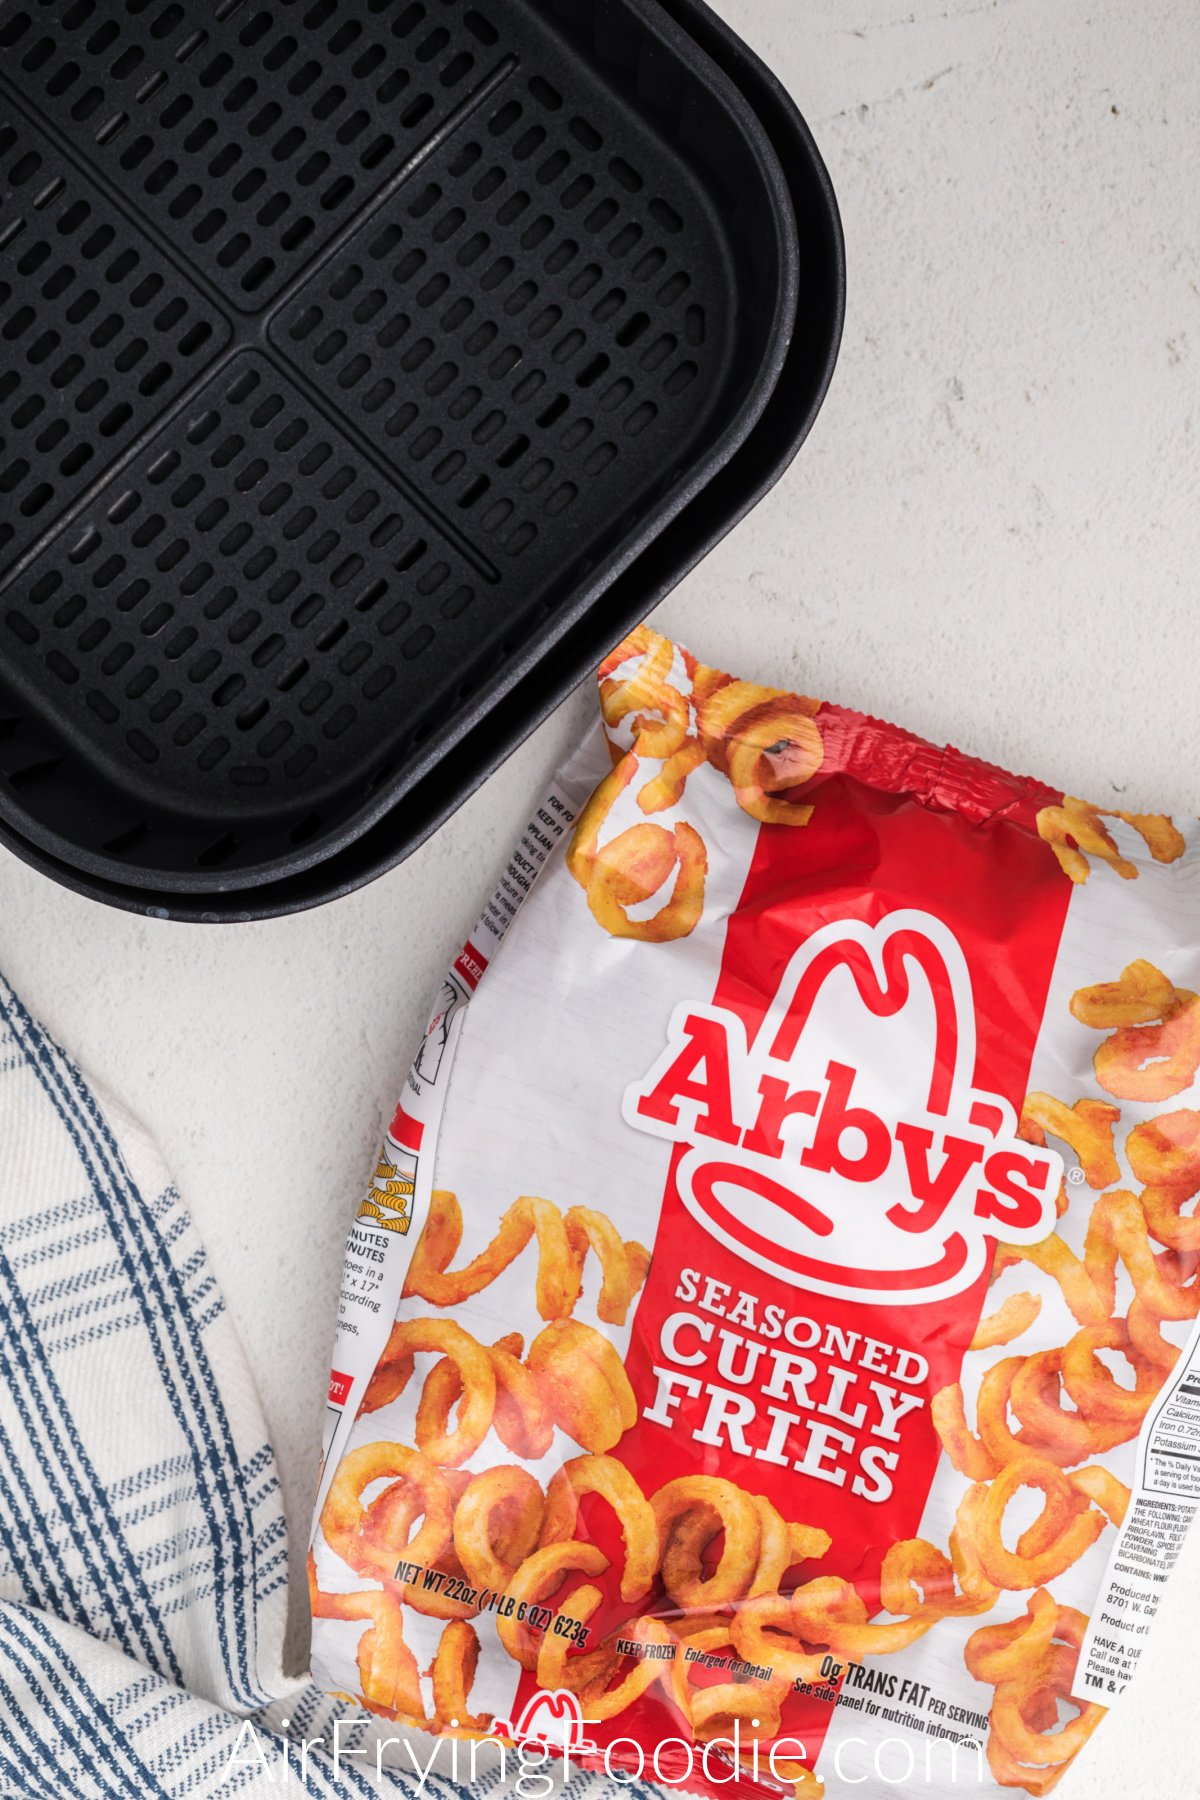 Air Fryer Basket and a bag of frozen curly fries from Arby's. 